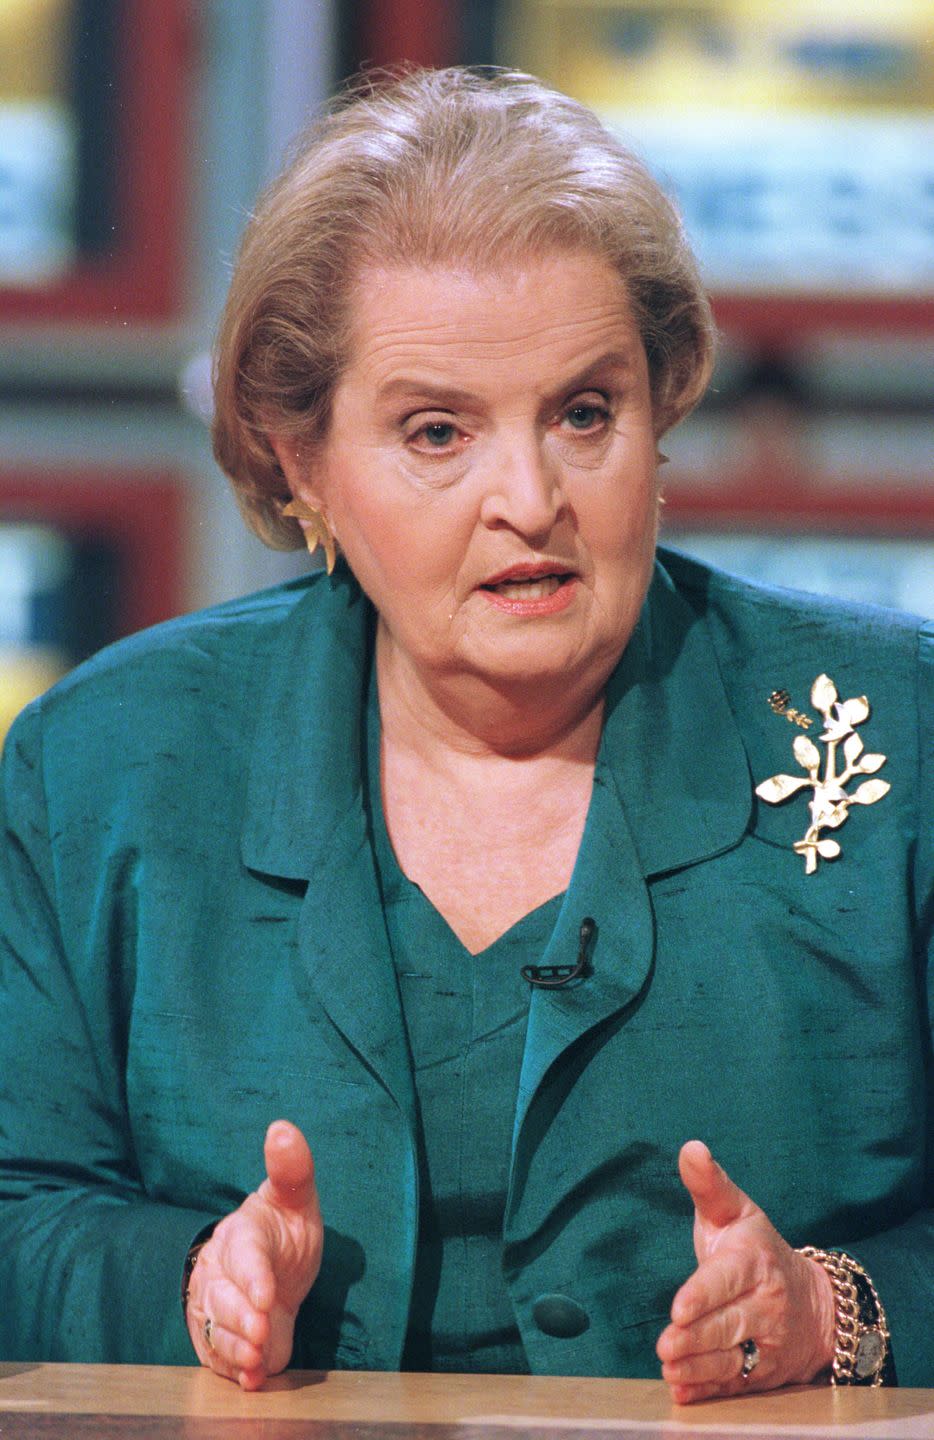 379834 02 secretary of state madeleine albright discusses the peace process in the middle east and the future of yugoslavia on nbcs meet the press october 8, 2000 in washington dc photo by alex wongnewsmakers